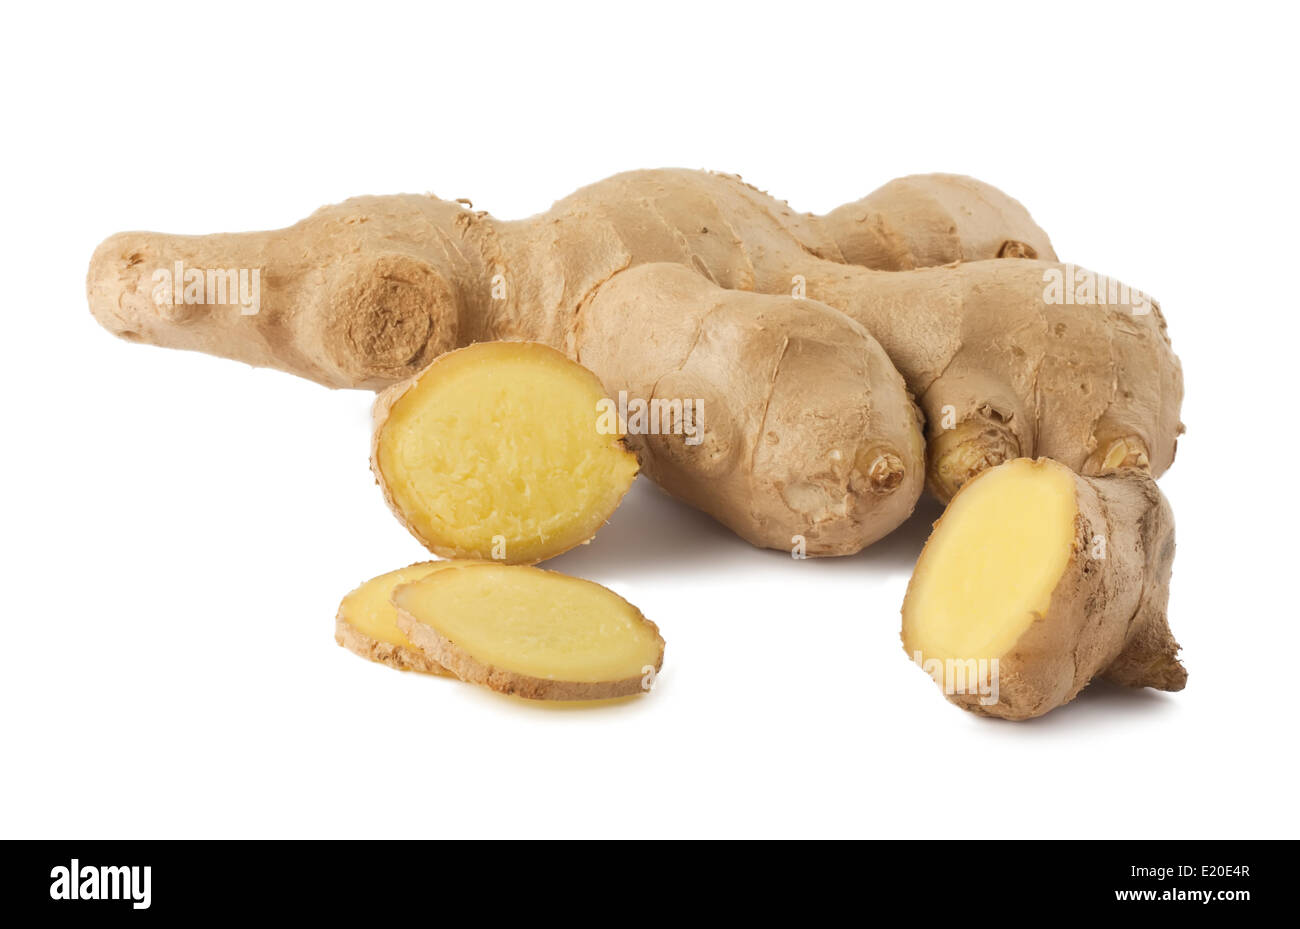 Whole and sliced ginger root Stock Photo